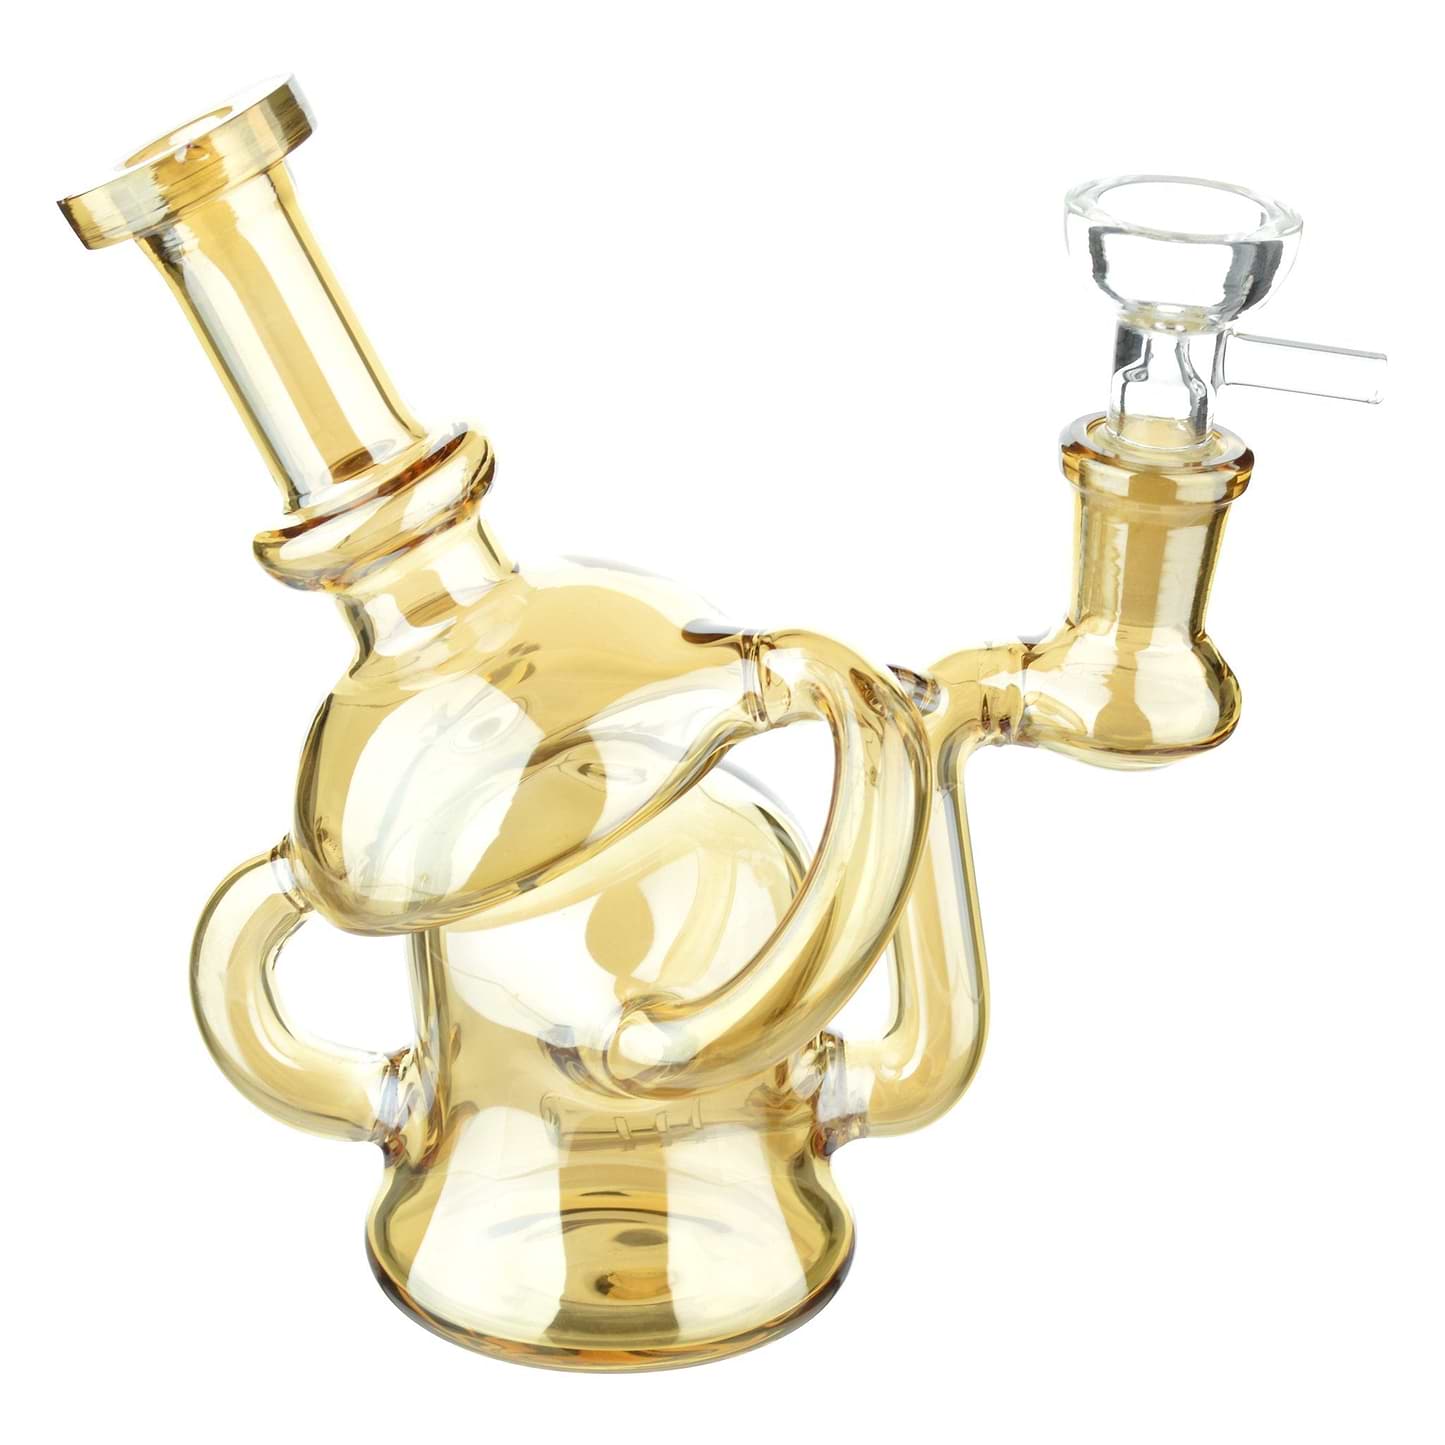 Full body shot of 6-inch glass multichambered bong smoking device mouthpiece facing left in copper color